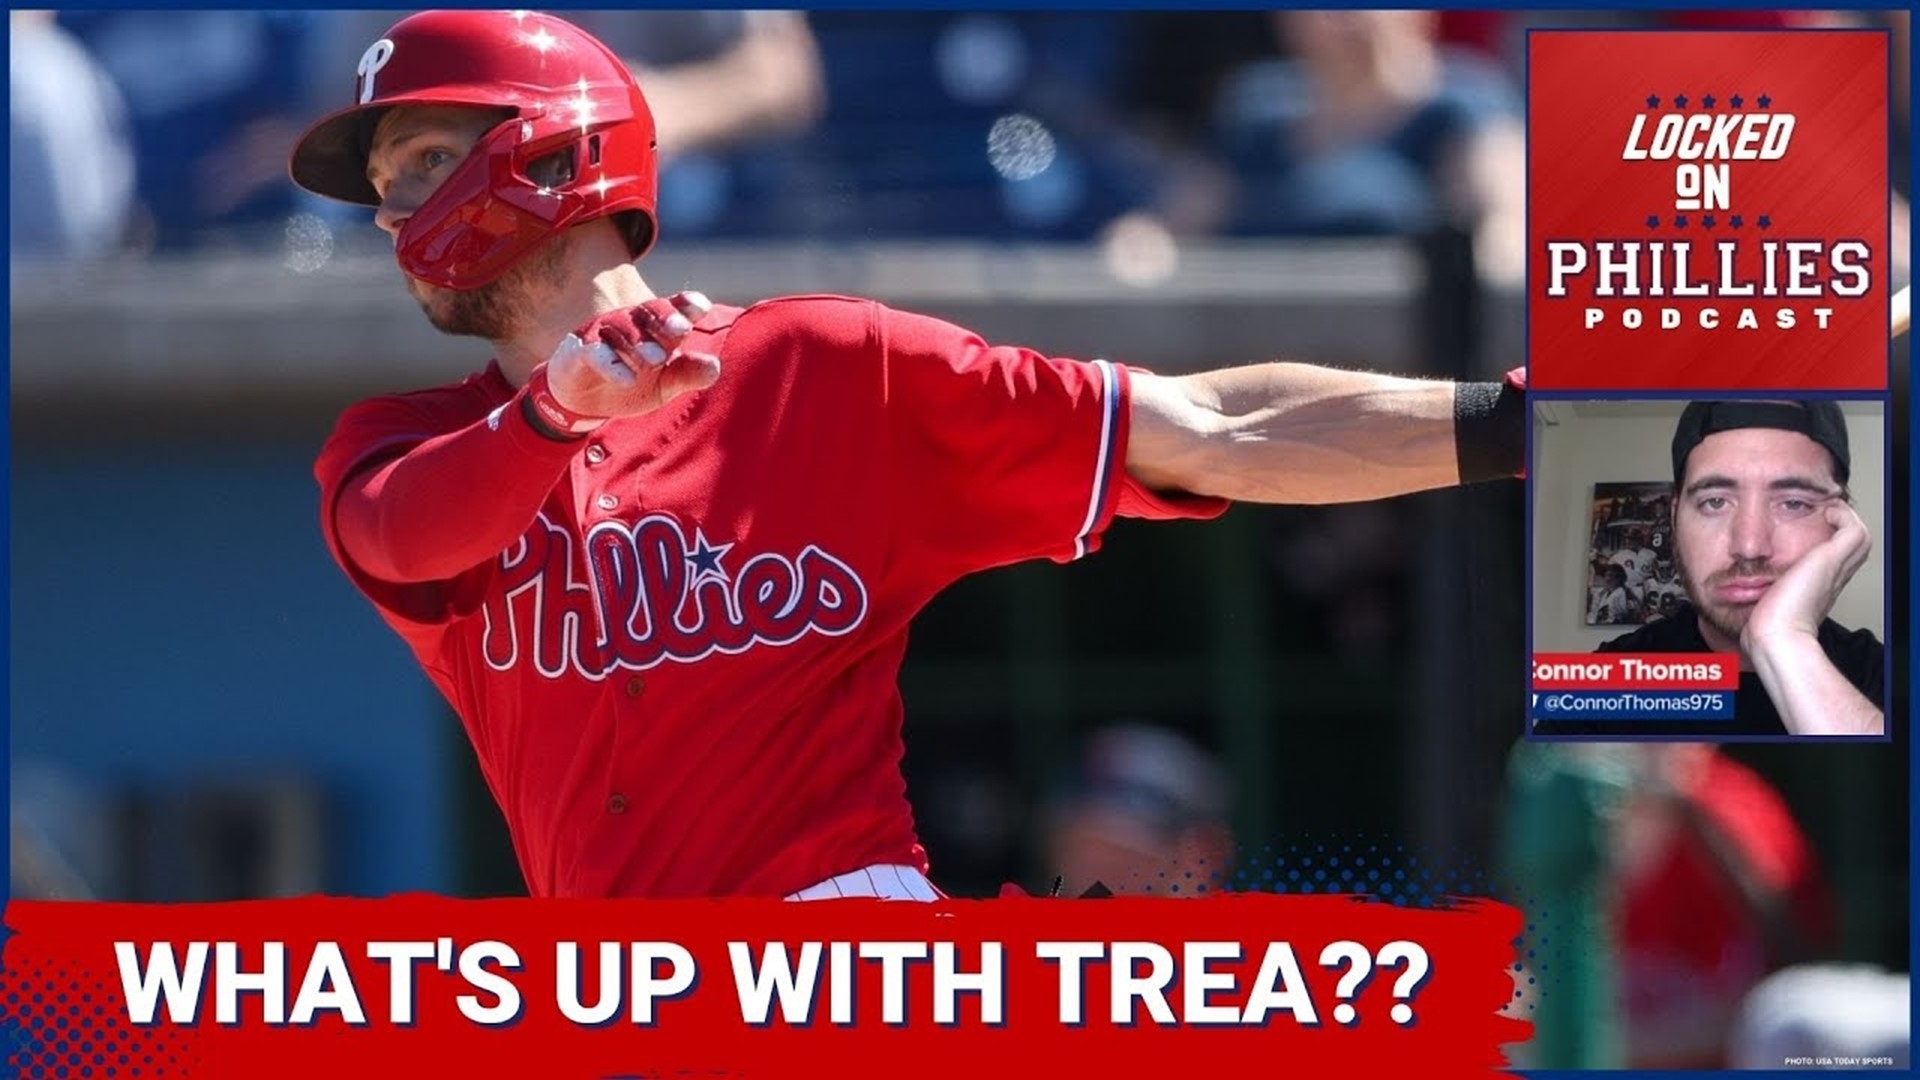 In today's episode, Connor dives deep into the struggles that are currently plaguing the Philadelphia Phillies' new $300mil shortstop Trea Turner.